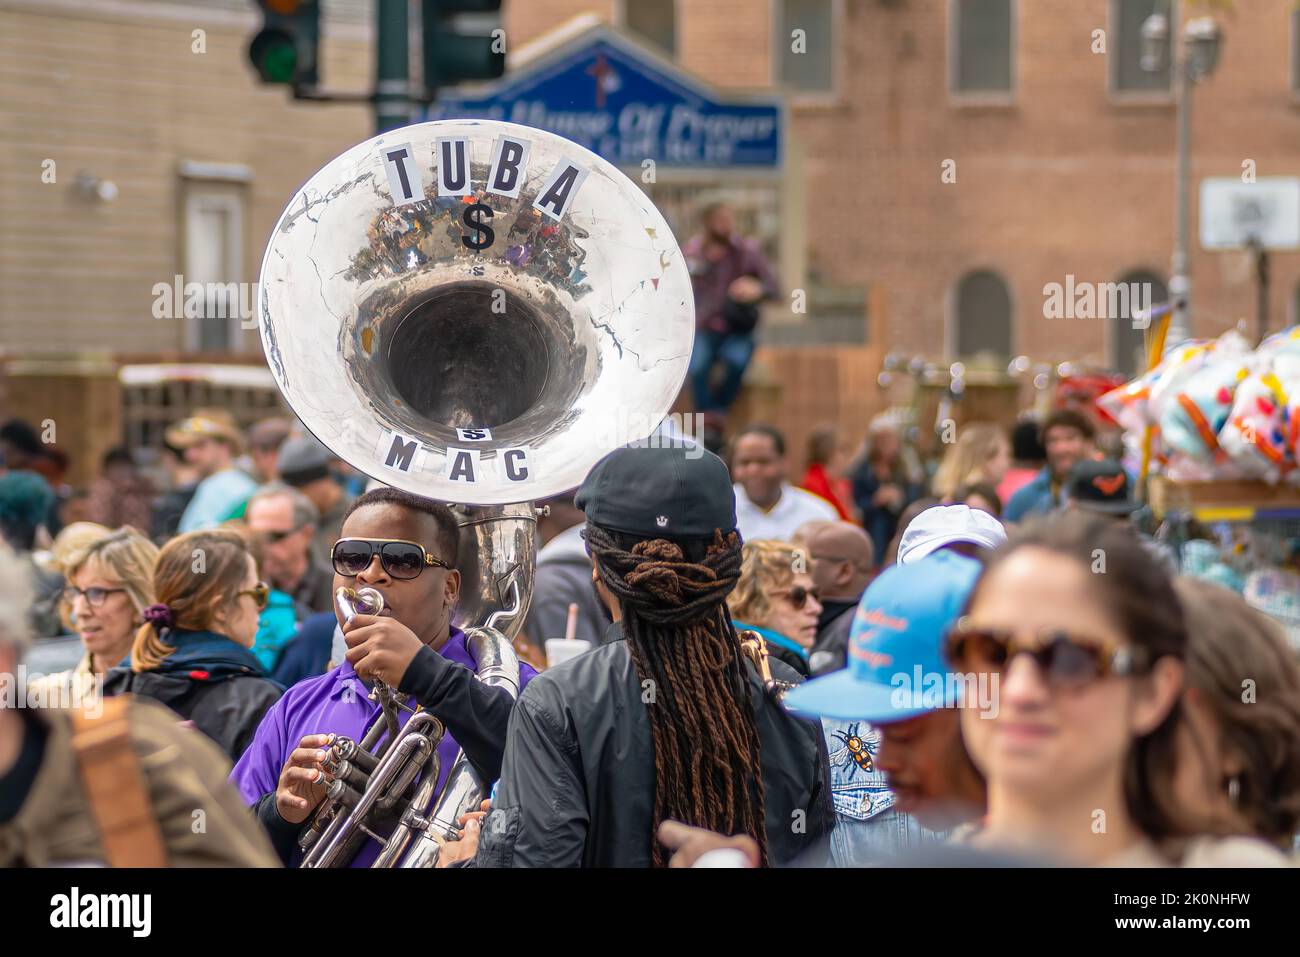 NEW ORLEANS, LA, USA - MARCH 17, 2019: Young man plays sousaphone in the midst of a seemingly oblivious crowd prior to annual Super Sunday parade Stock Photo